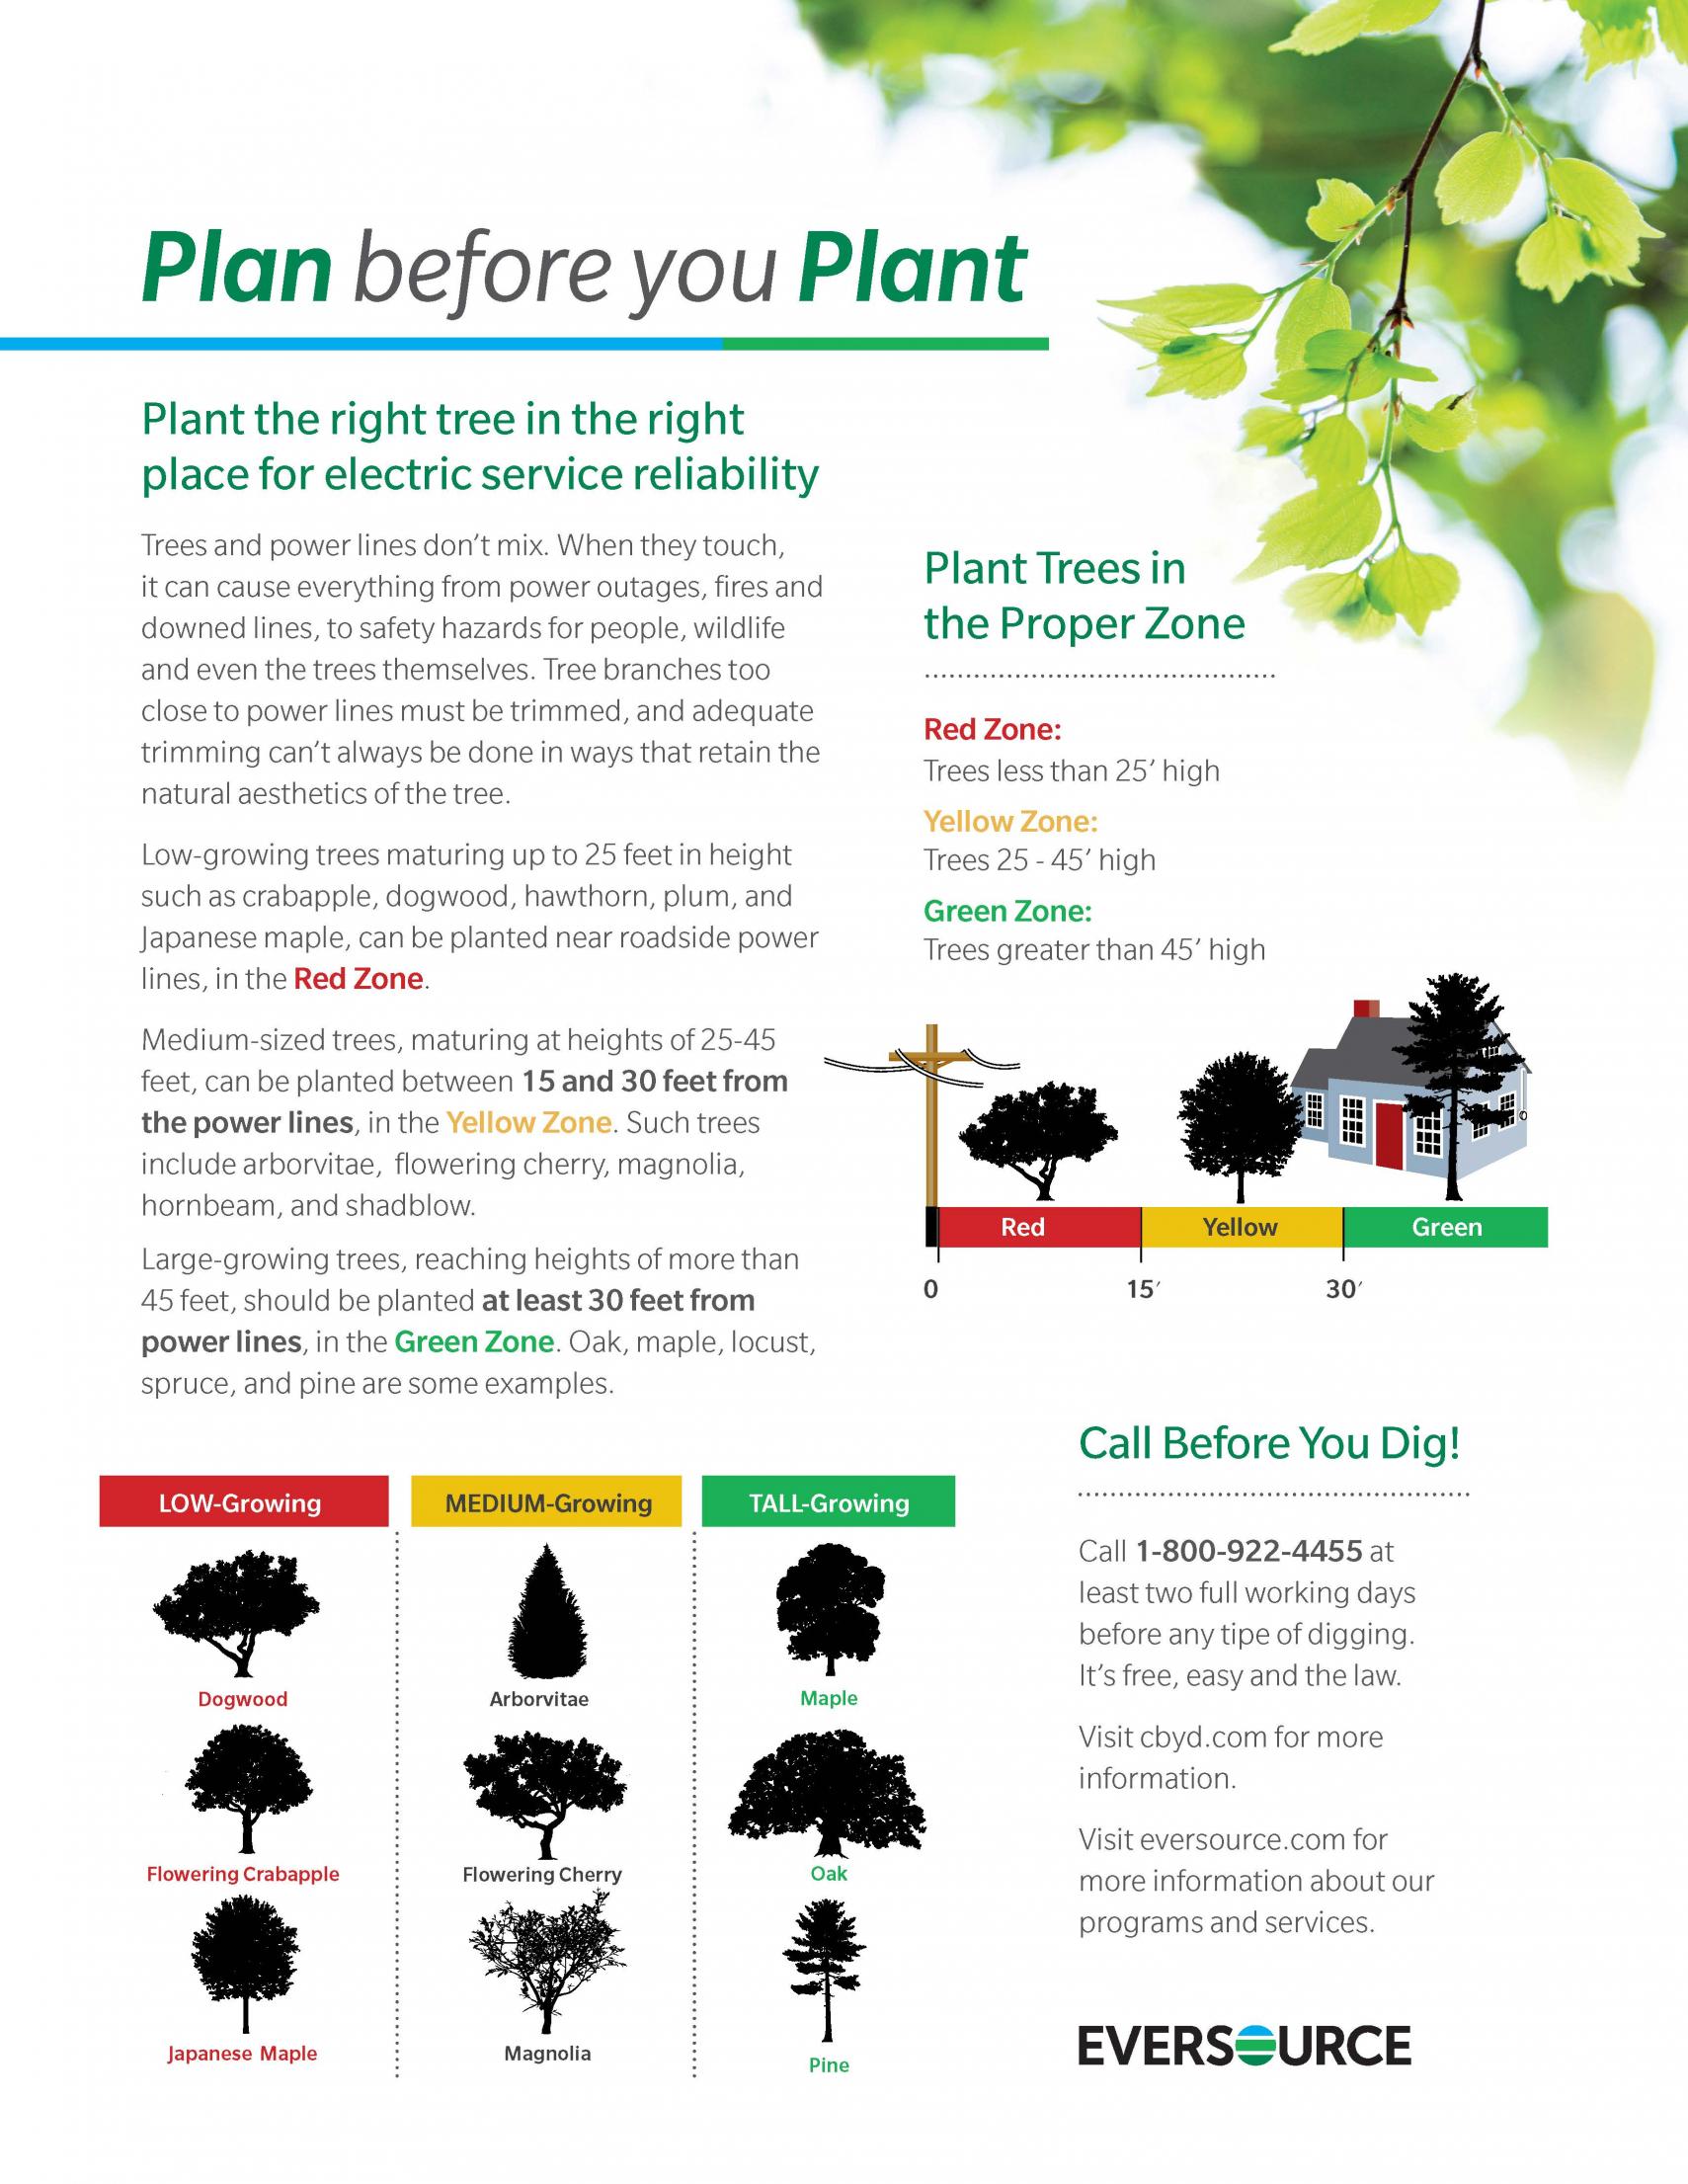 Plan before you plant